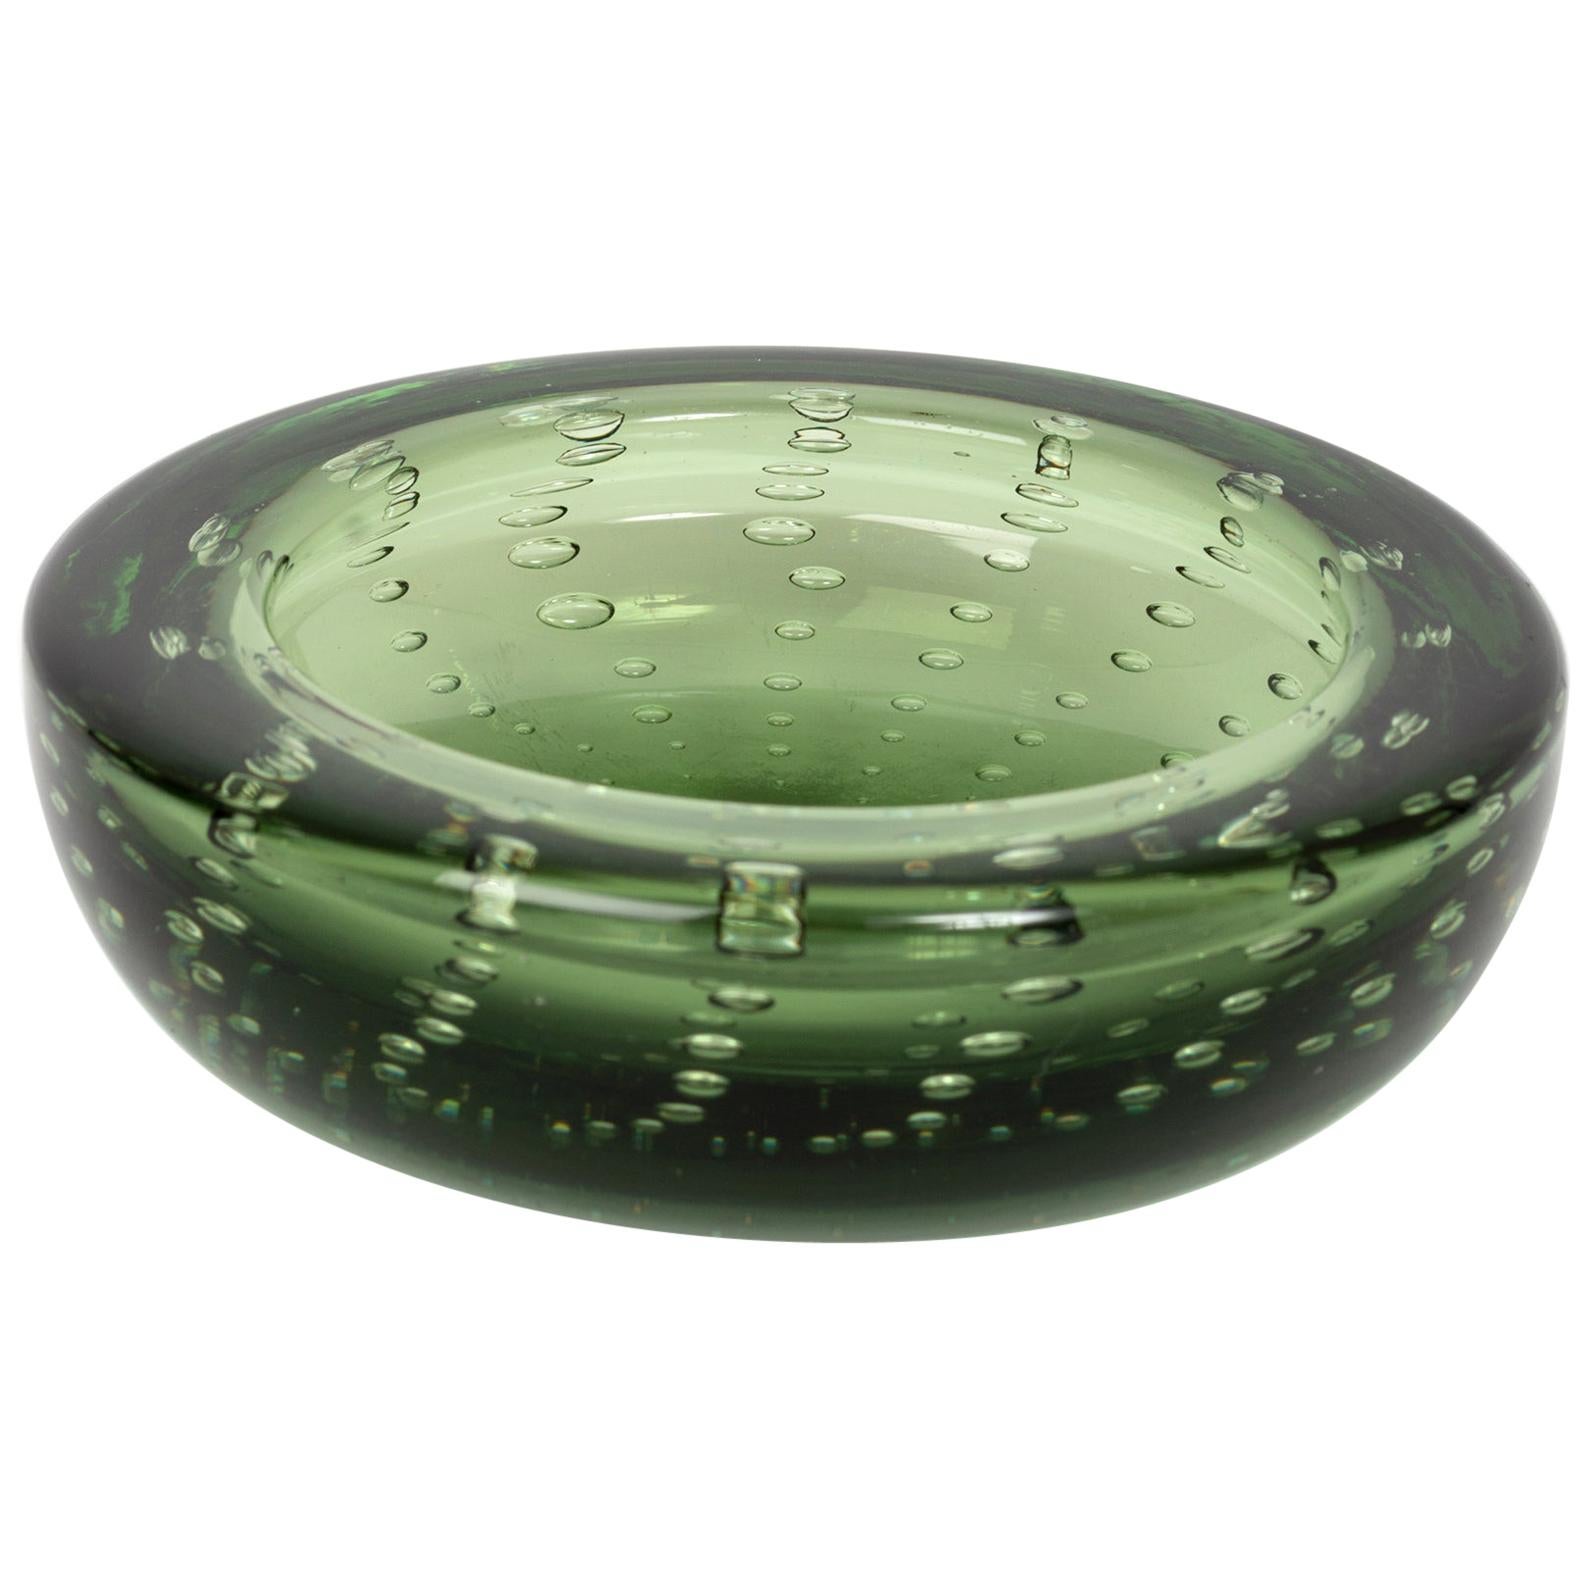 Murano Green Ashtray Bowl with Air Bubbles by Archimede Seguso, Italy, C.1960